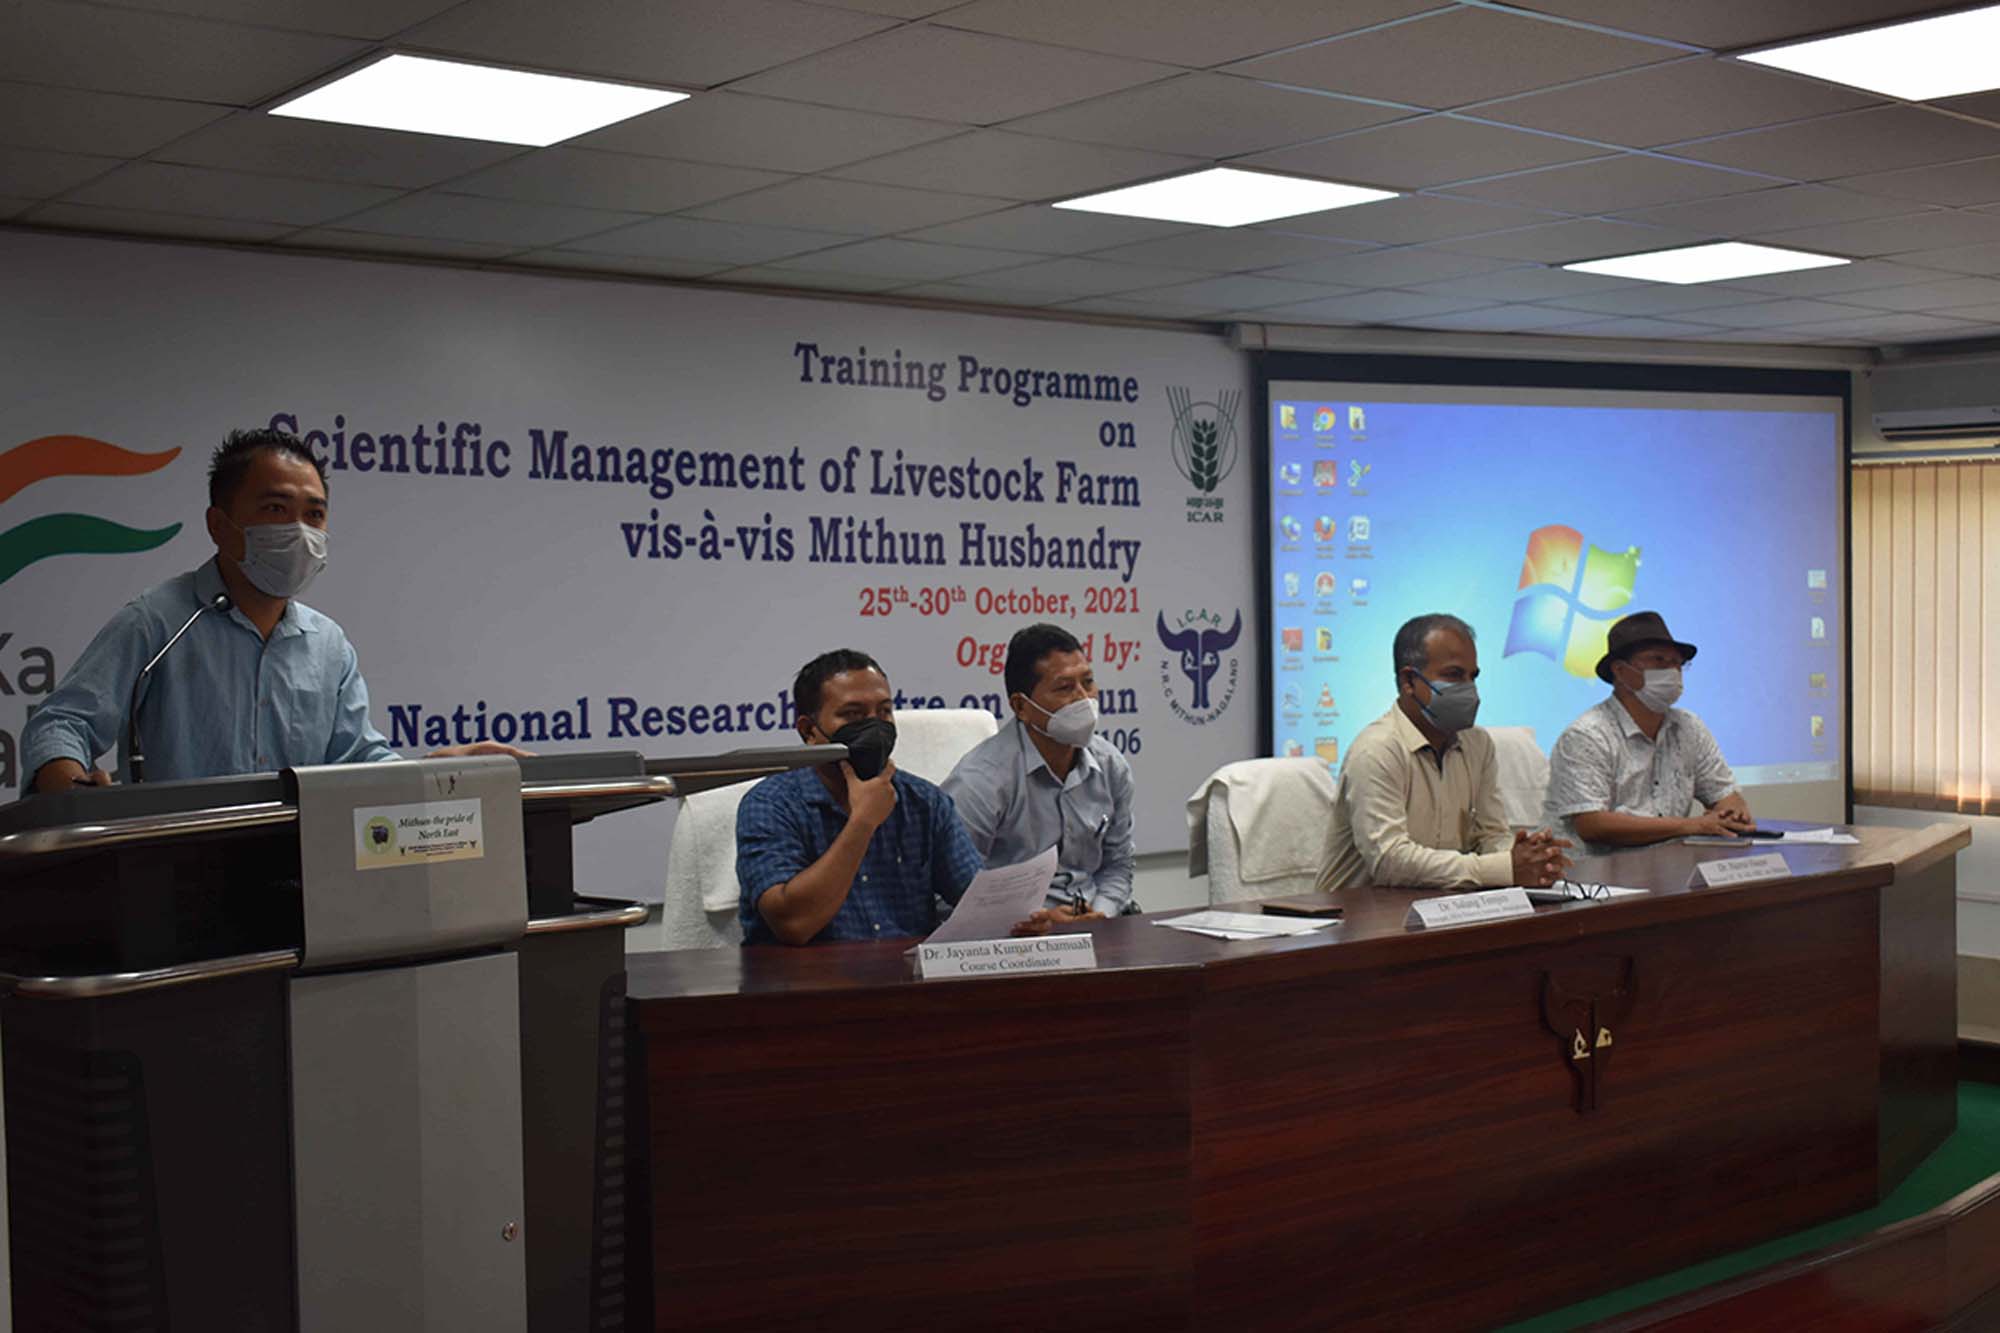 ICAR-NRC on Mithun conducted 6-Days training programme on “Scientific Management of Livestock Farm vis-à-vis Mithun Husbandry” w.e.f 25th to 30th October, 2021